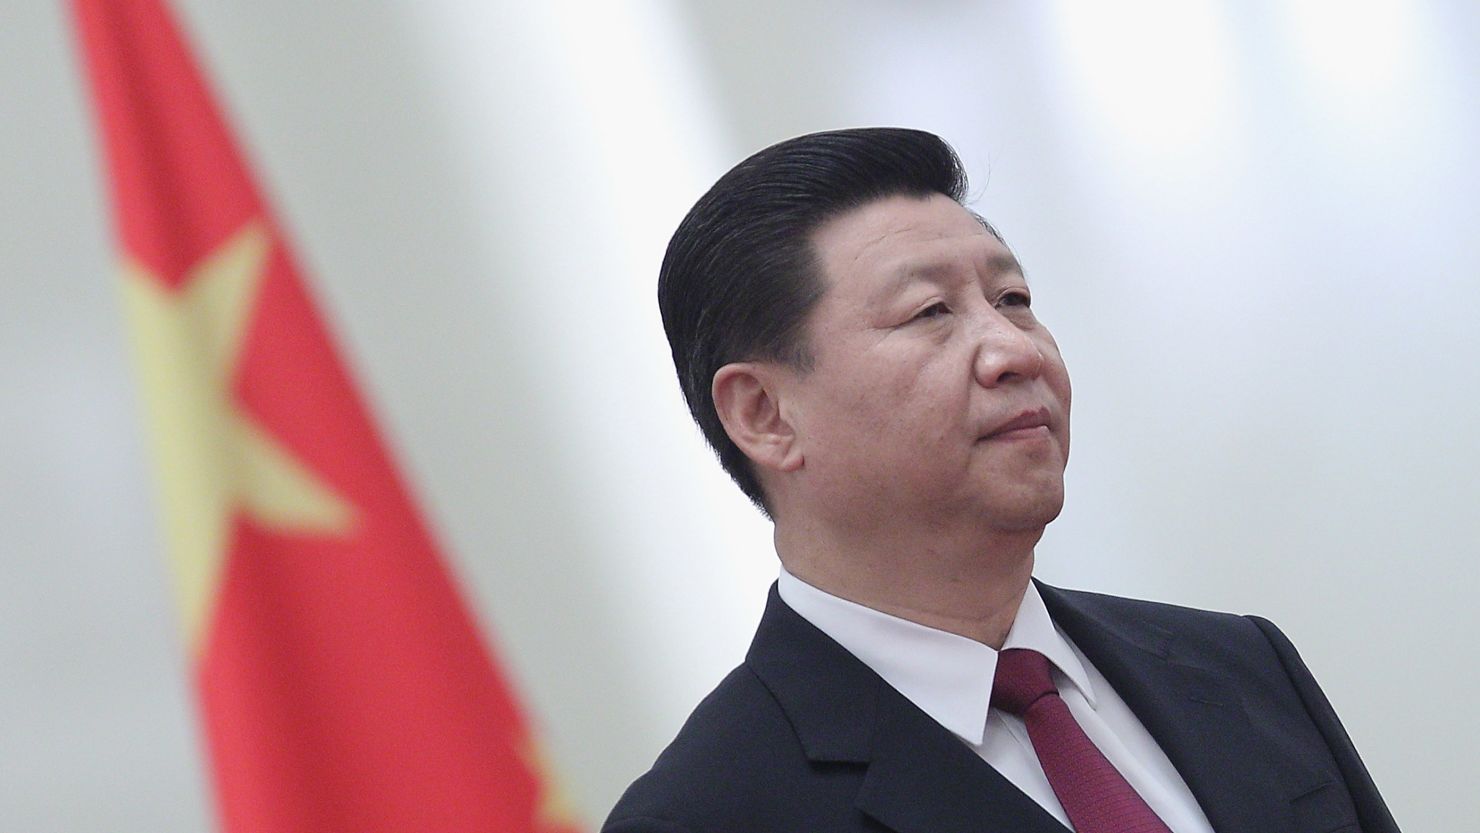 Chinese vice president Xi Jinping will meet with President Obama on Tuesday.